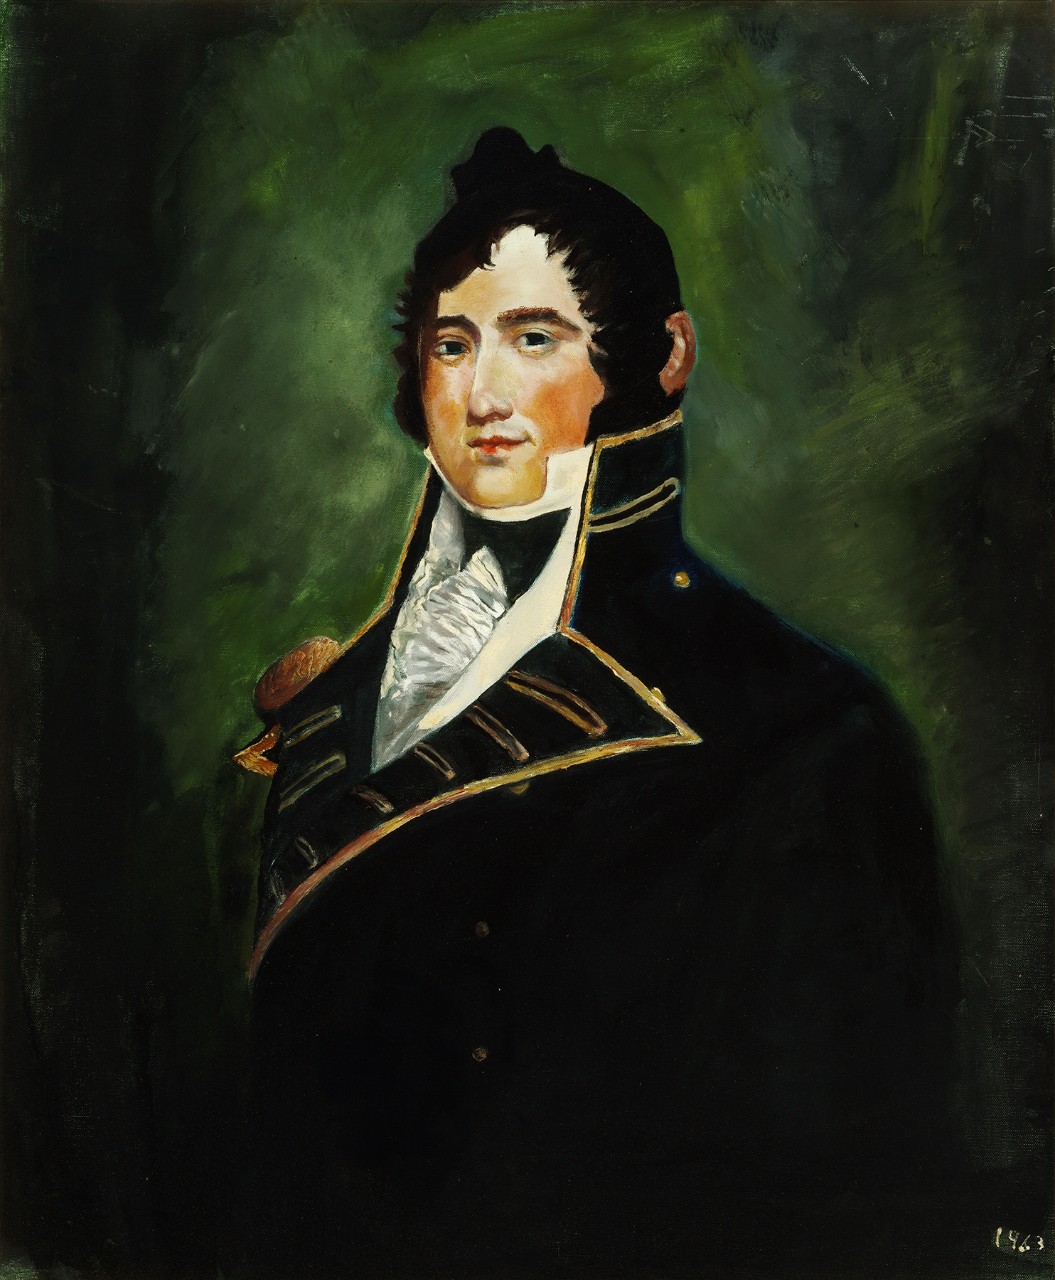 Portrait of James Lawrence with a green background